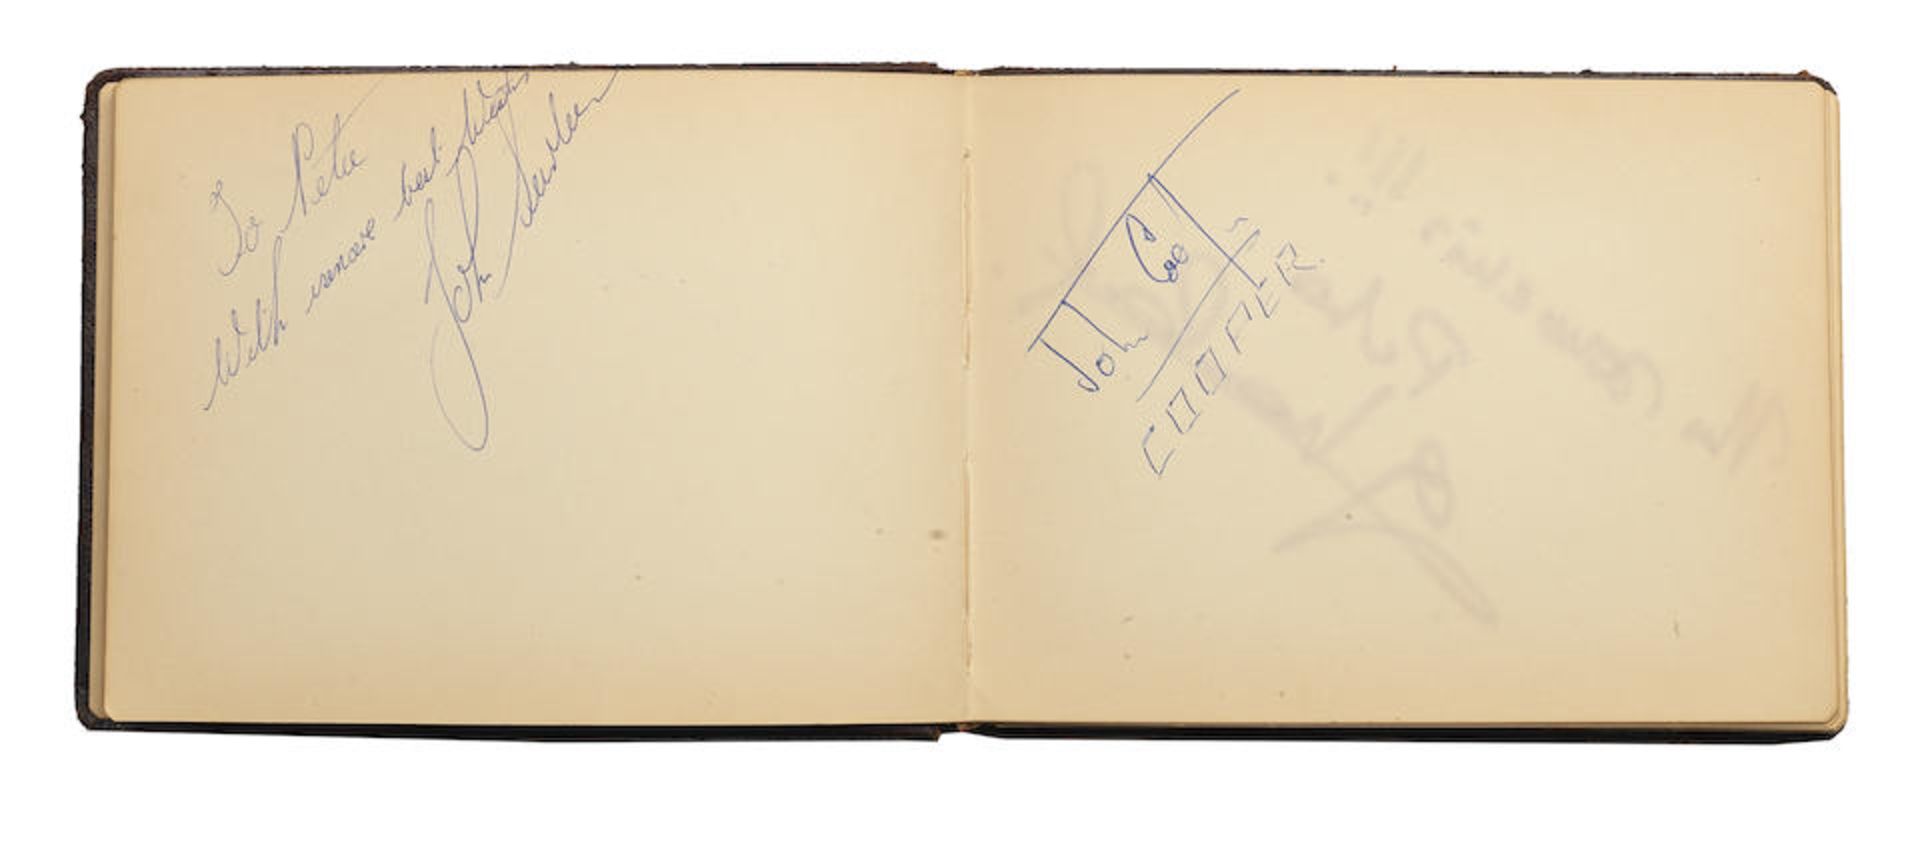 An autograph book comprising many signatures including Mike Hawthorn and Picasso, ((2)) - Image 4 of 5